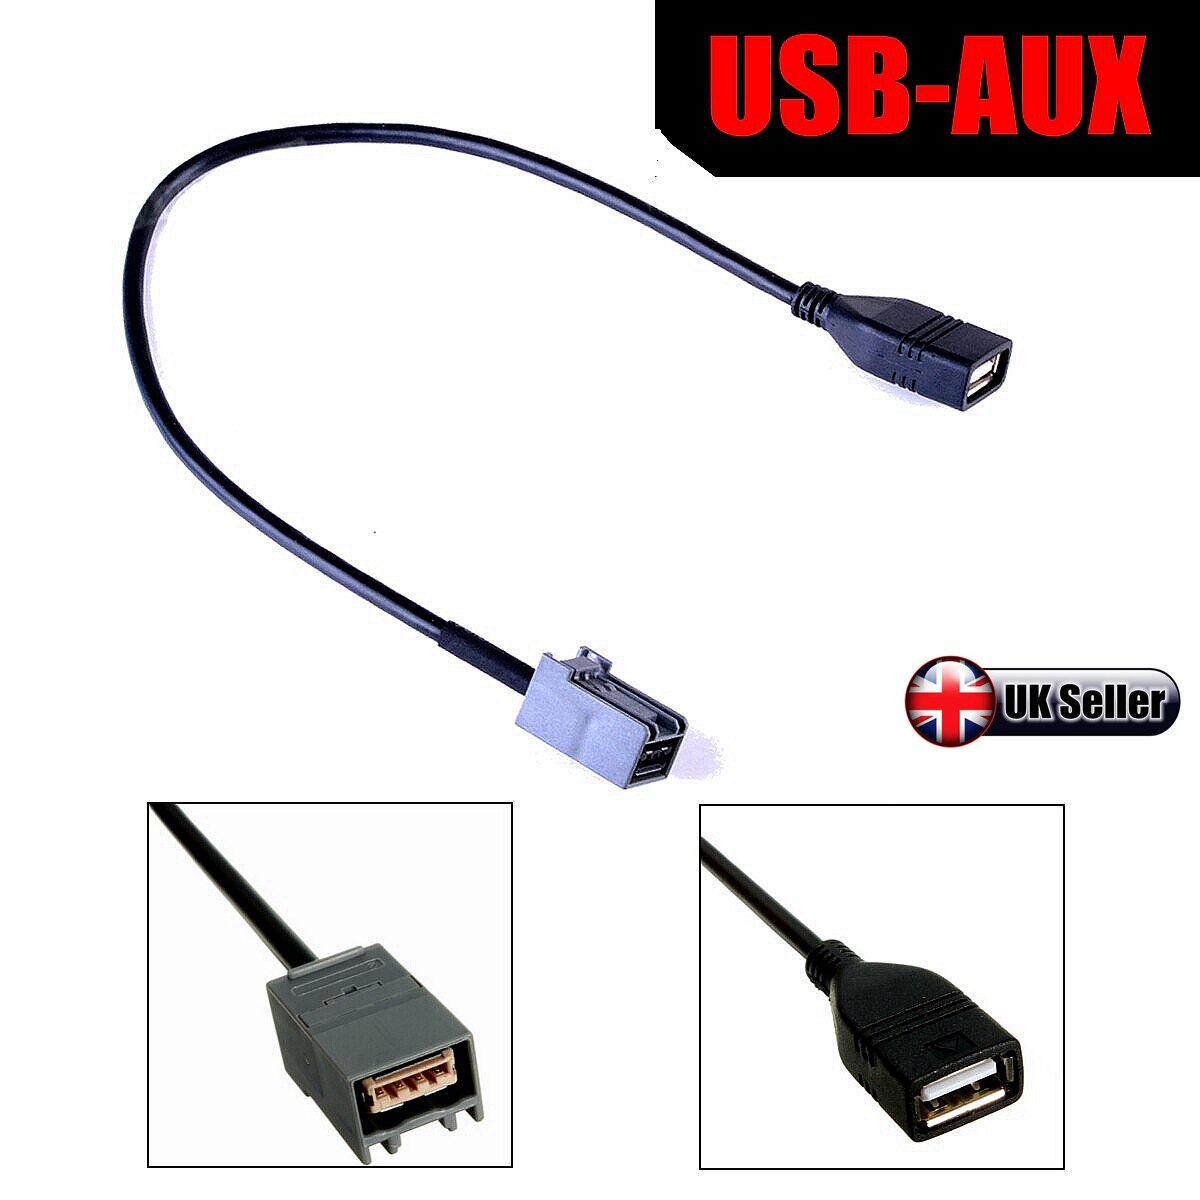 Aux USB Kabel Adapter Vrouwelijke Poort Extension Wire Voor Honda Civic Jazz CR-V Accord Stereo MP3